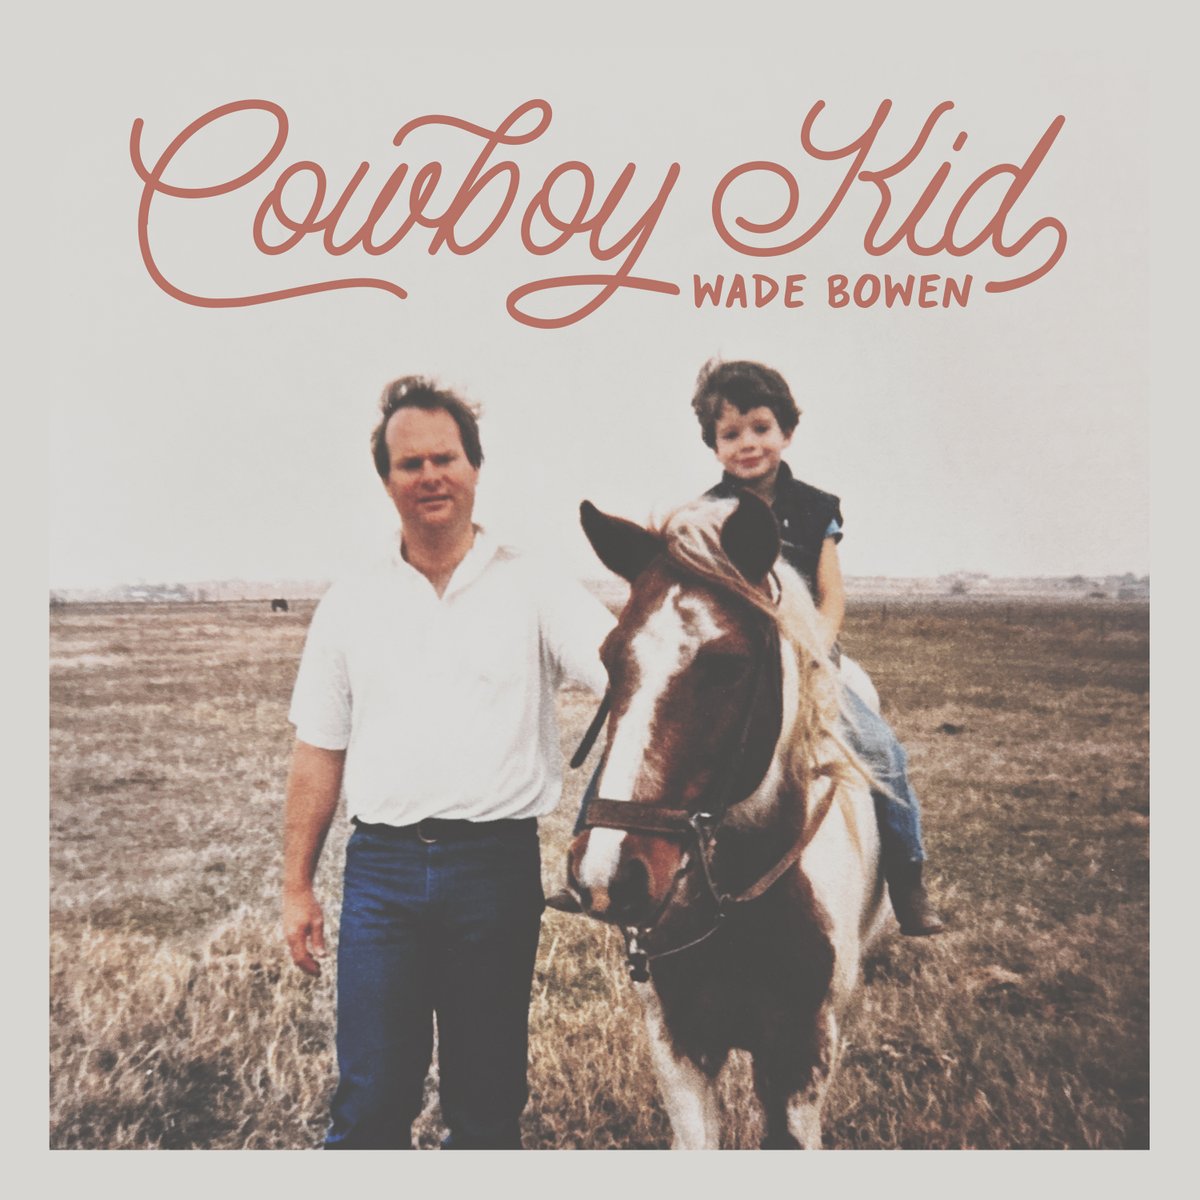 So proud of my cowboy kids for who they’re growing up to be. Hard to believe how fast the time goes…

My new song #CowboyKid is out this Friday! Pre-save/pre-add: orcd.co/cowboykid